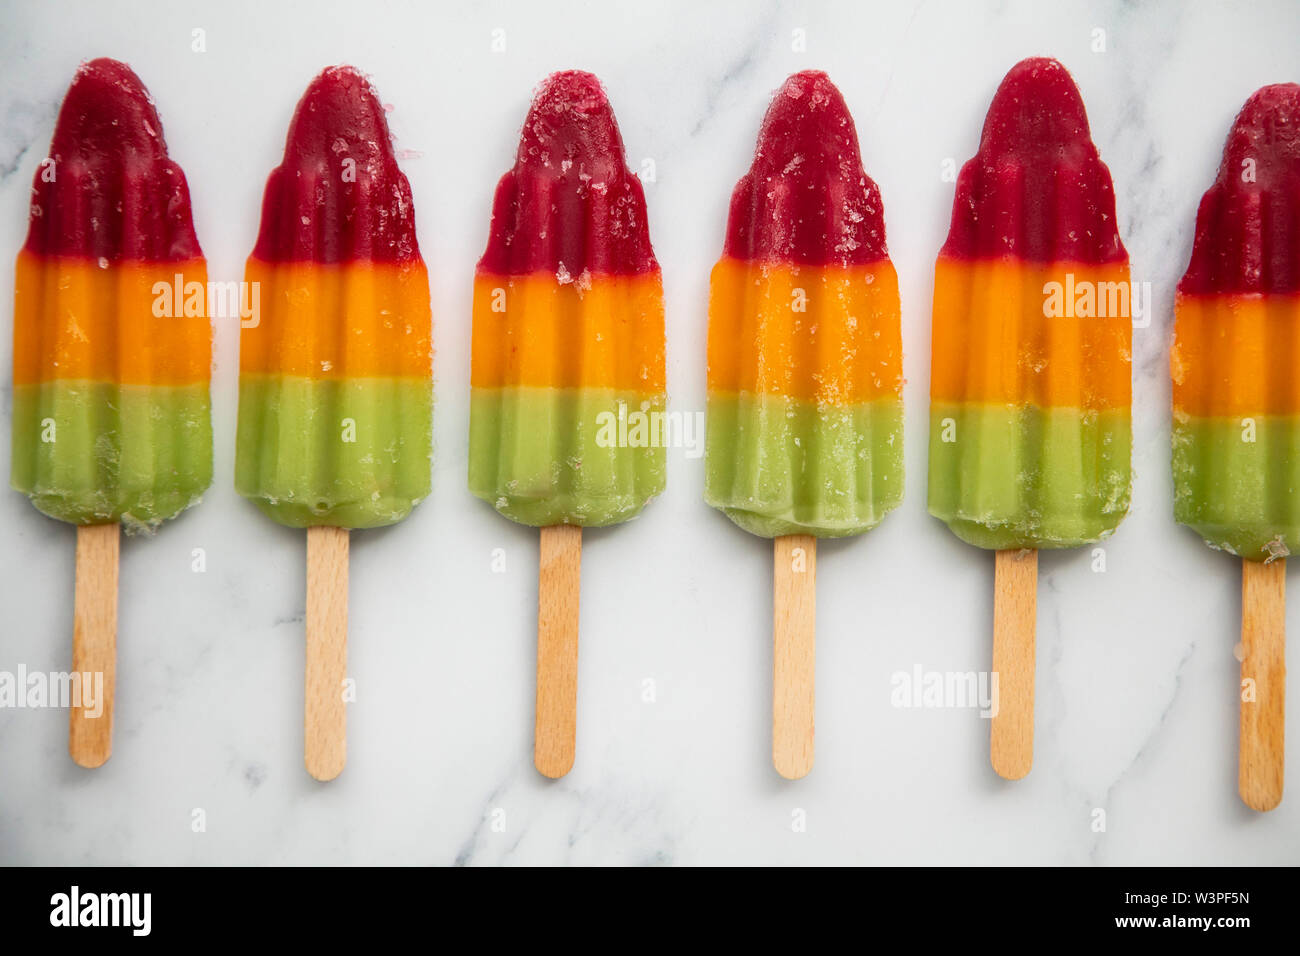 Summer fruit ice lolly popcicle on a marble background Stock Photo